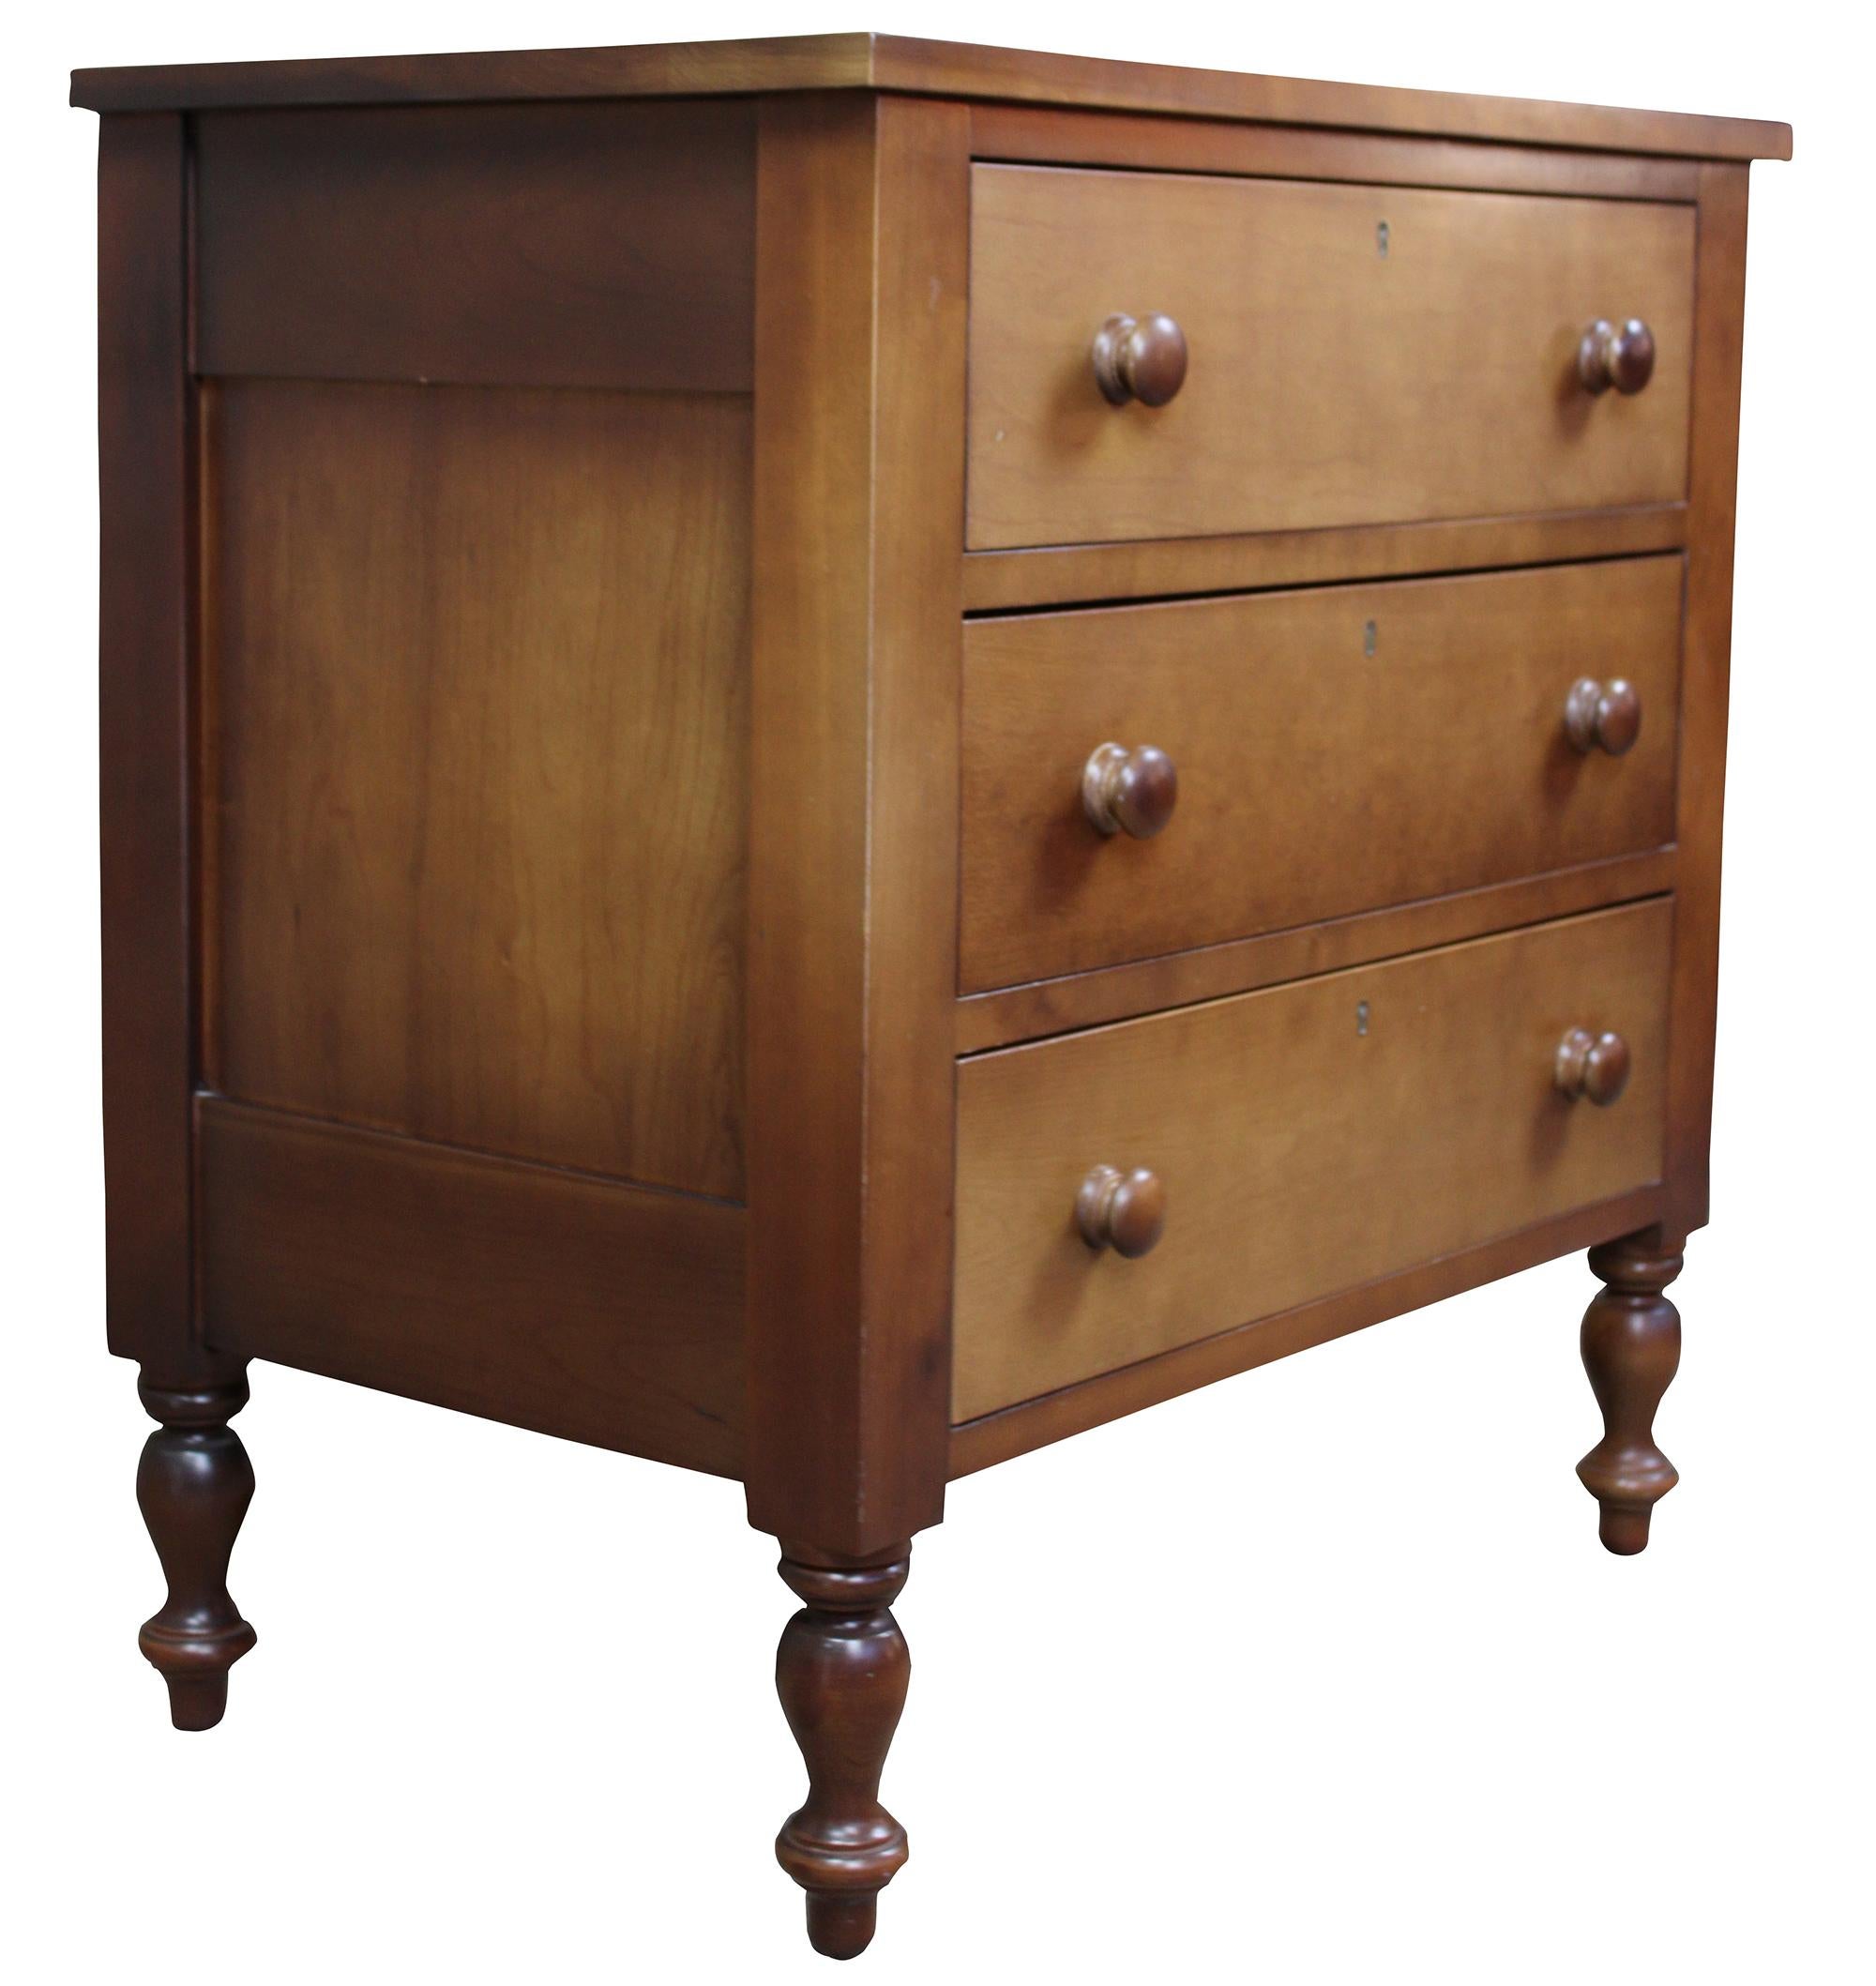 Vintage Cassady Furniture Co solid cherry dresser, chest or nightstand. An Early American reproduction featuring three dovetailed drawers. Cassady Furniture is out of bowling green kentucky, circa 1980s.
  